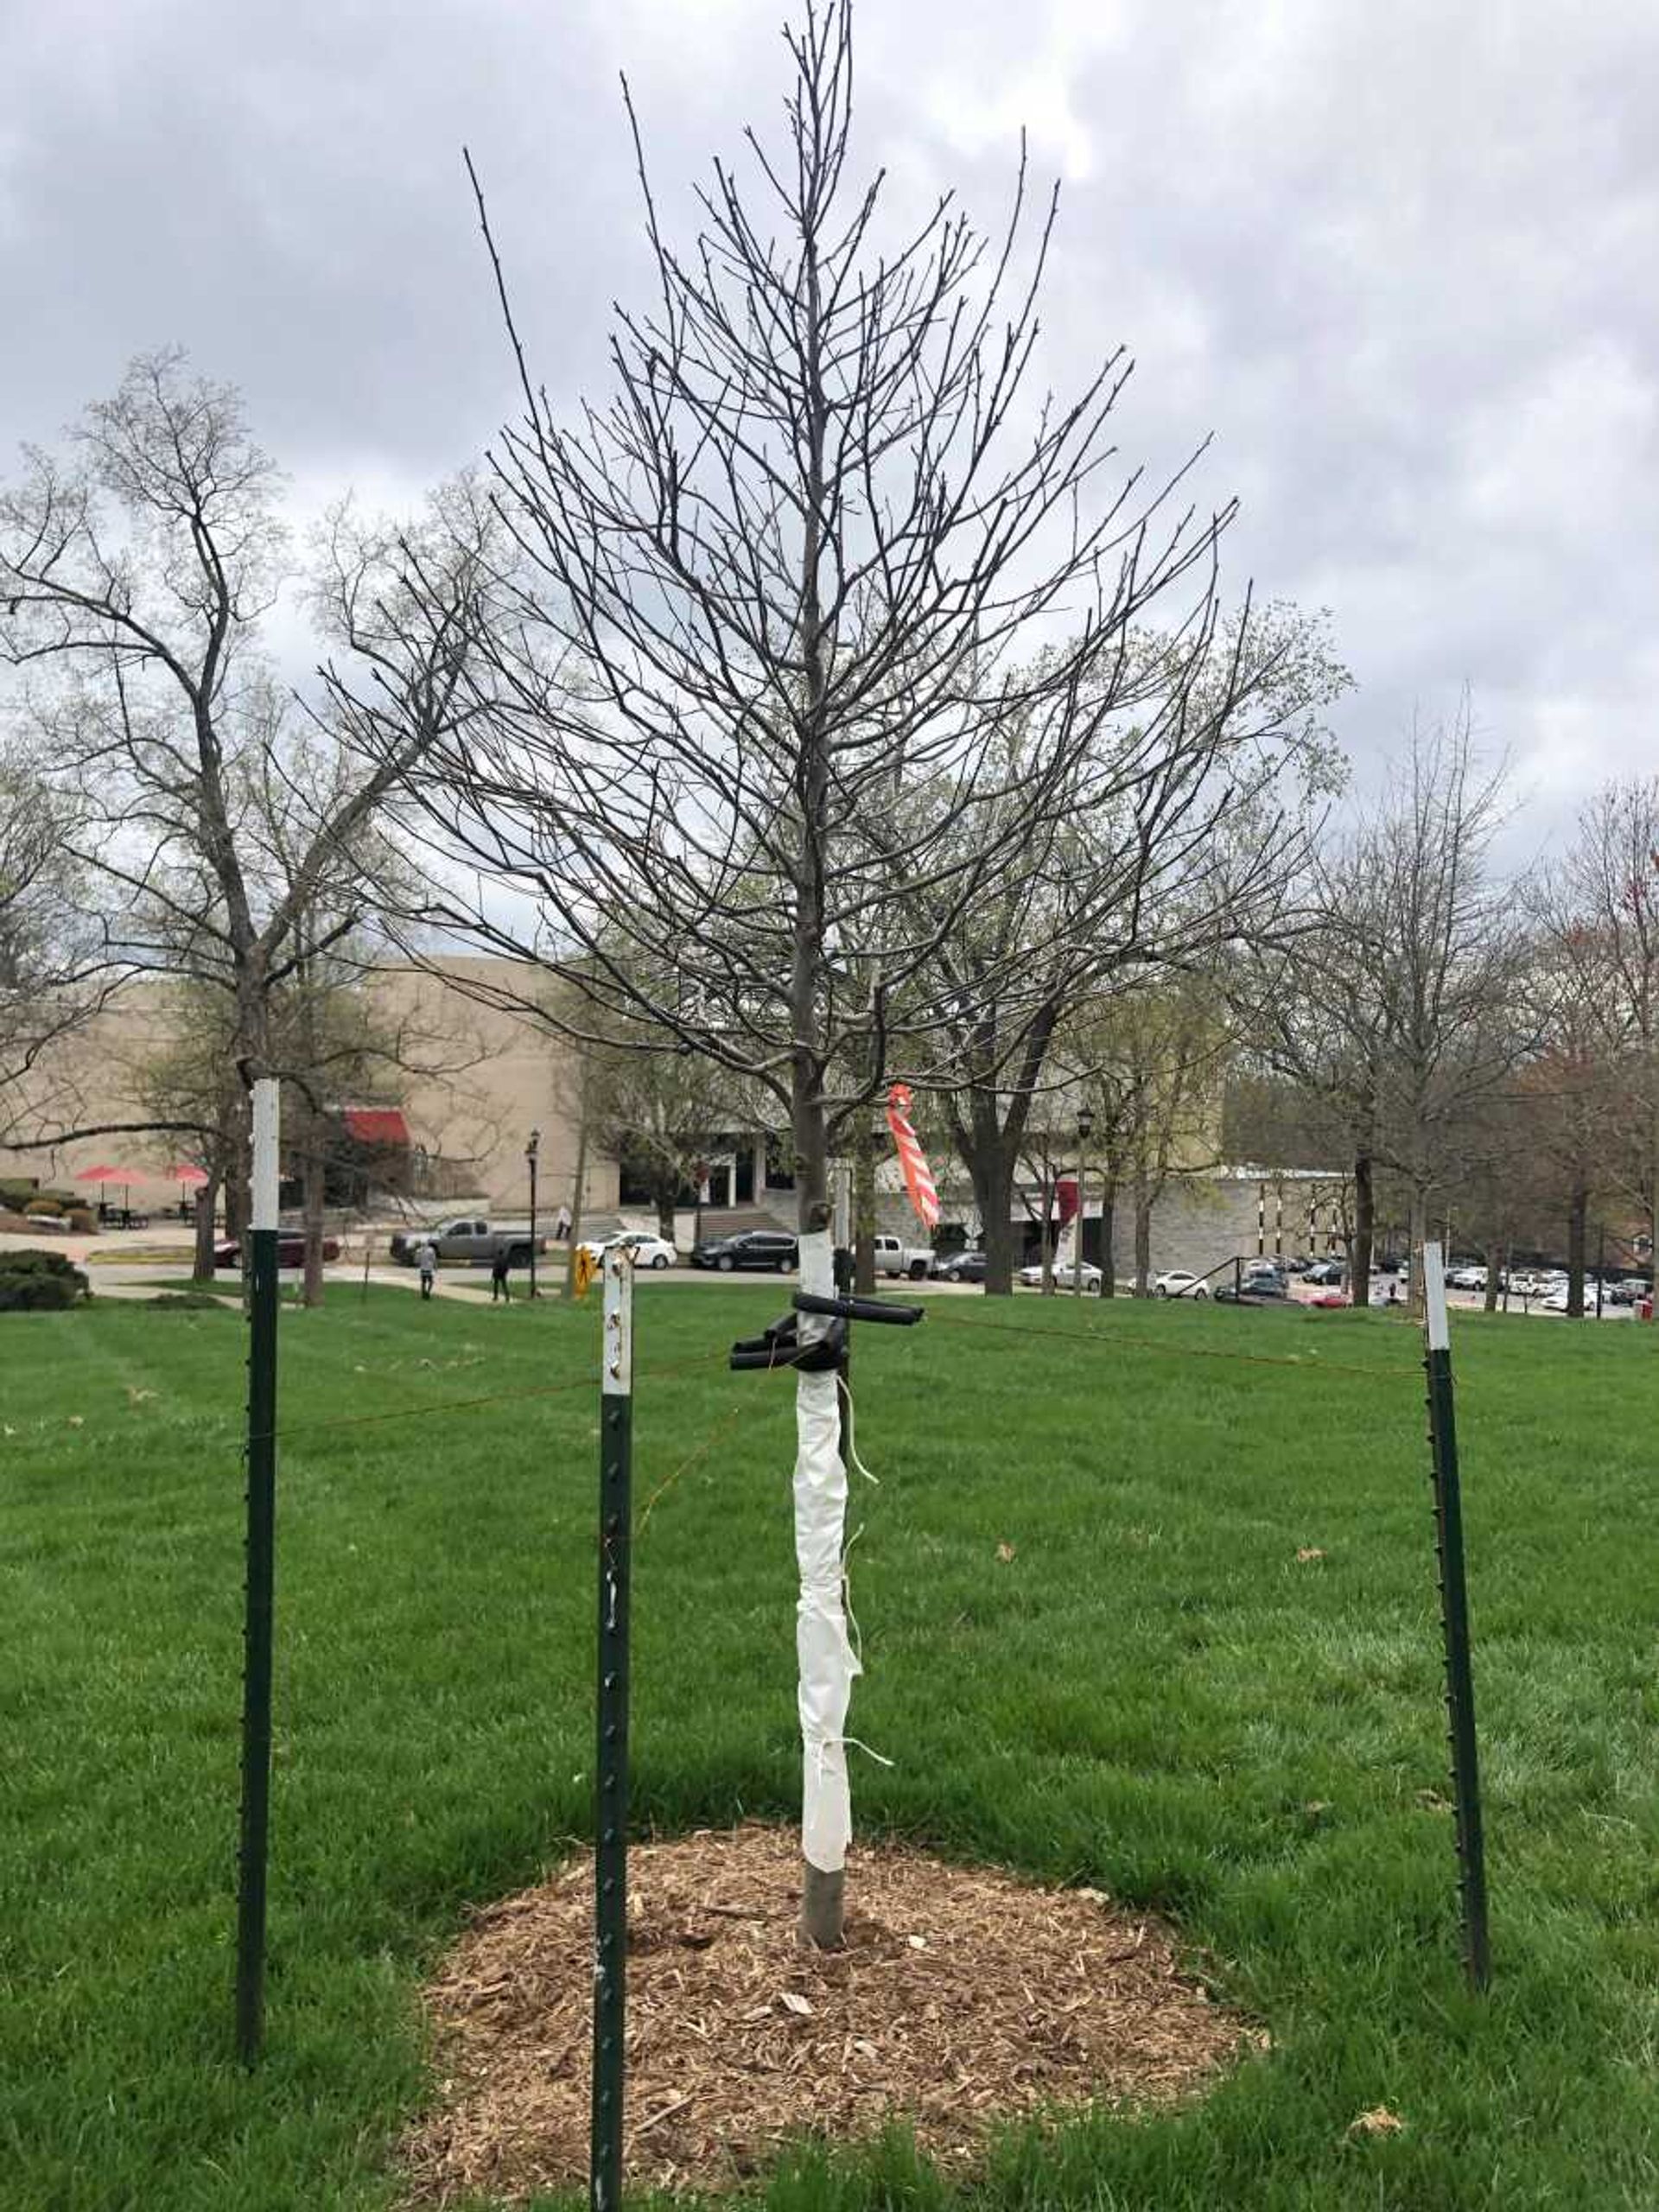 A Black Gum tree was planted and dedicated to the local rotary club for a century of service in the community.